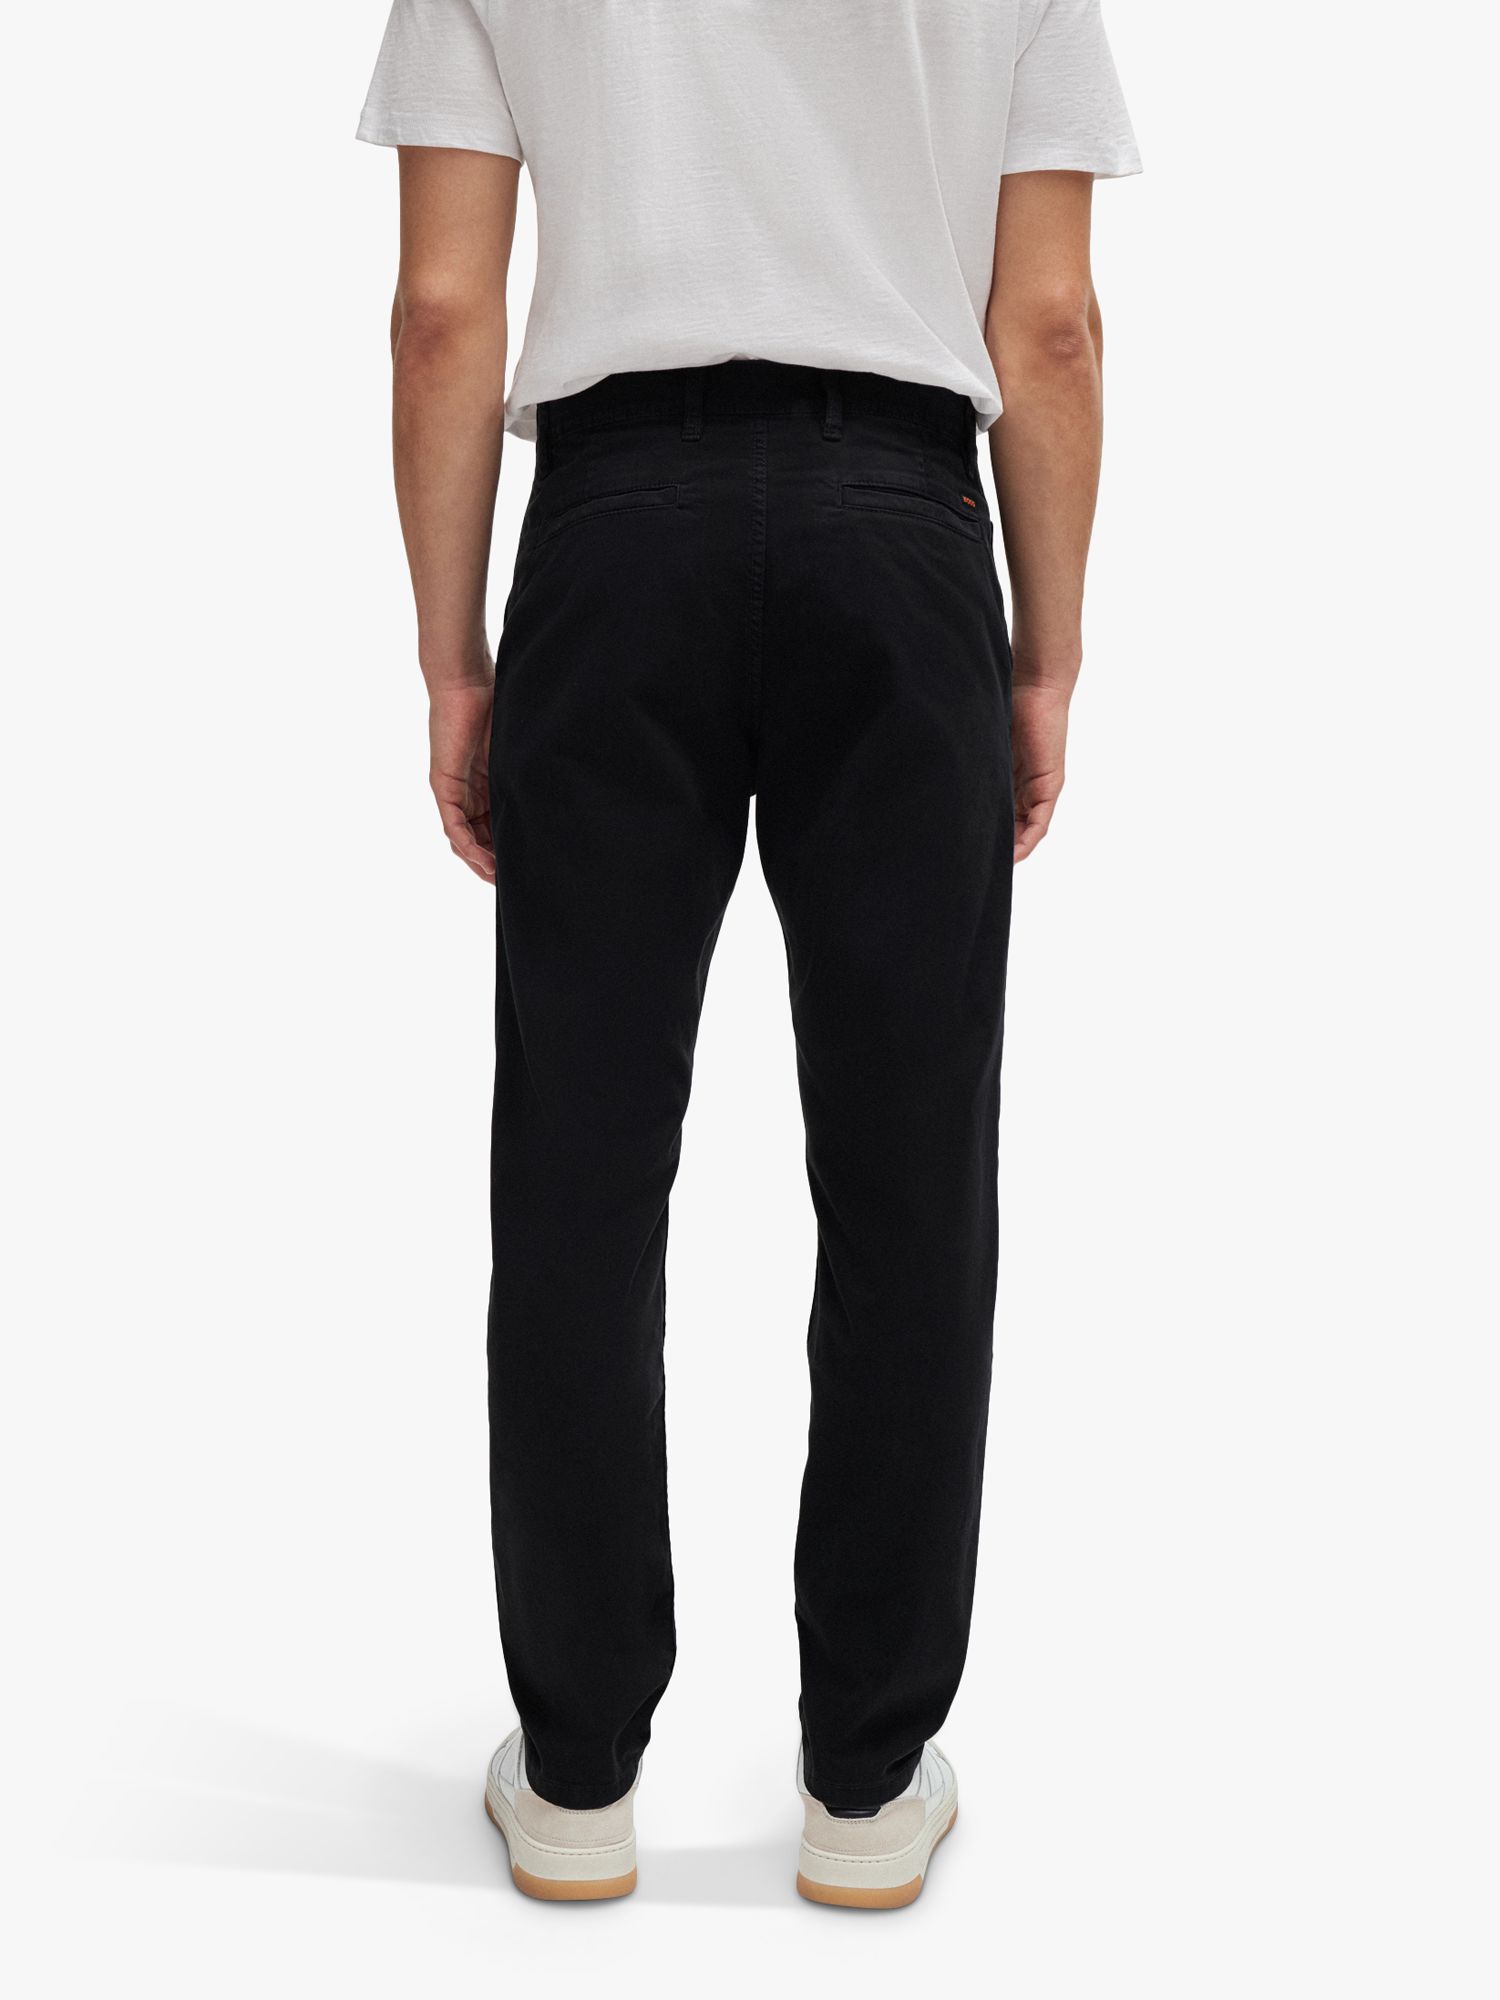 BOSS Cotton Tapered Chinos, Black, 29L